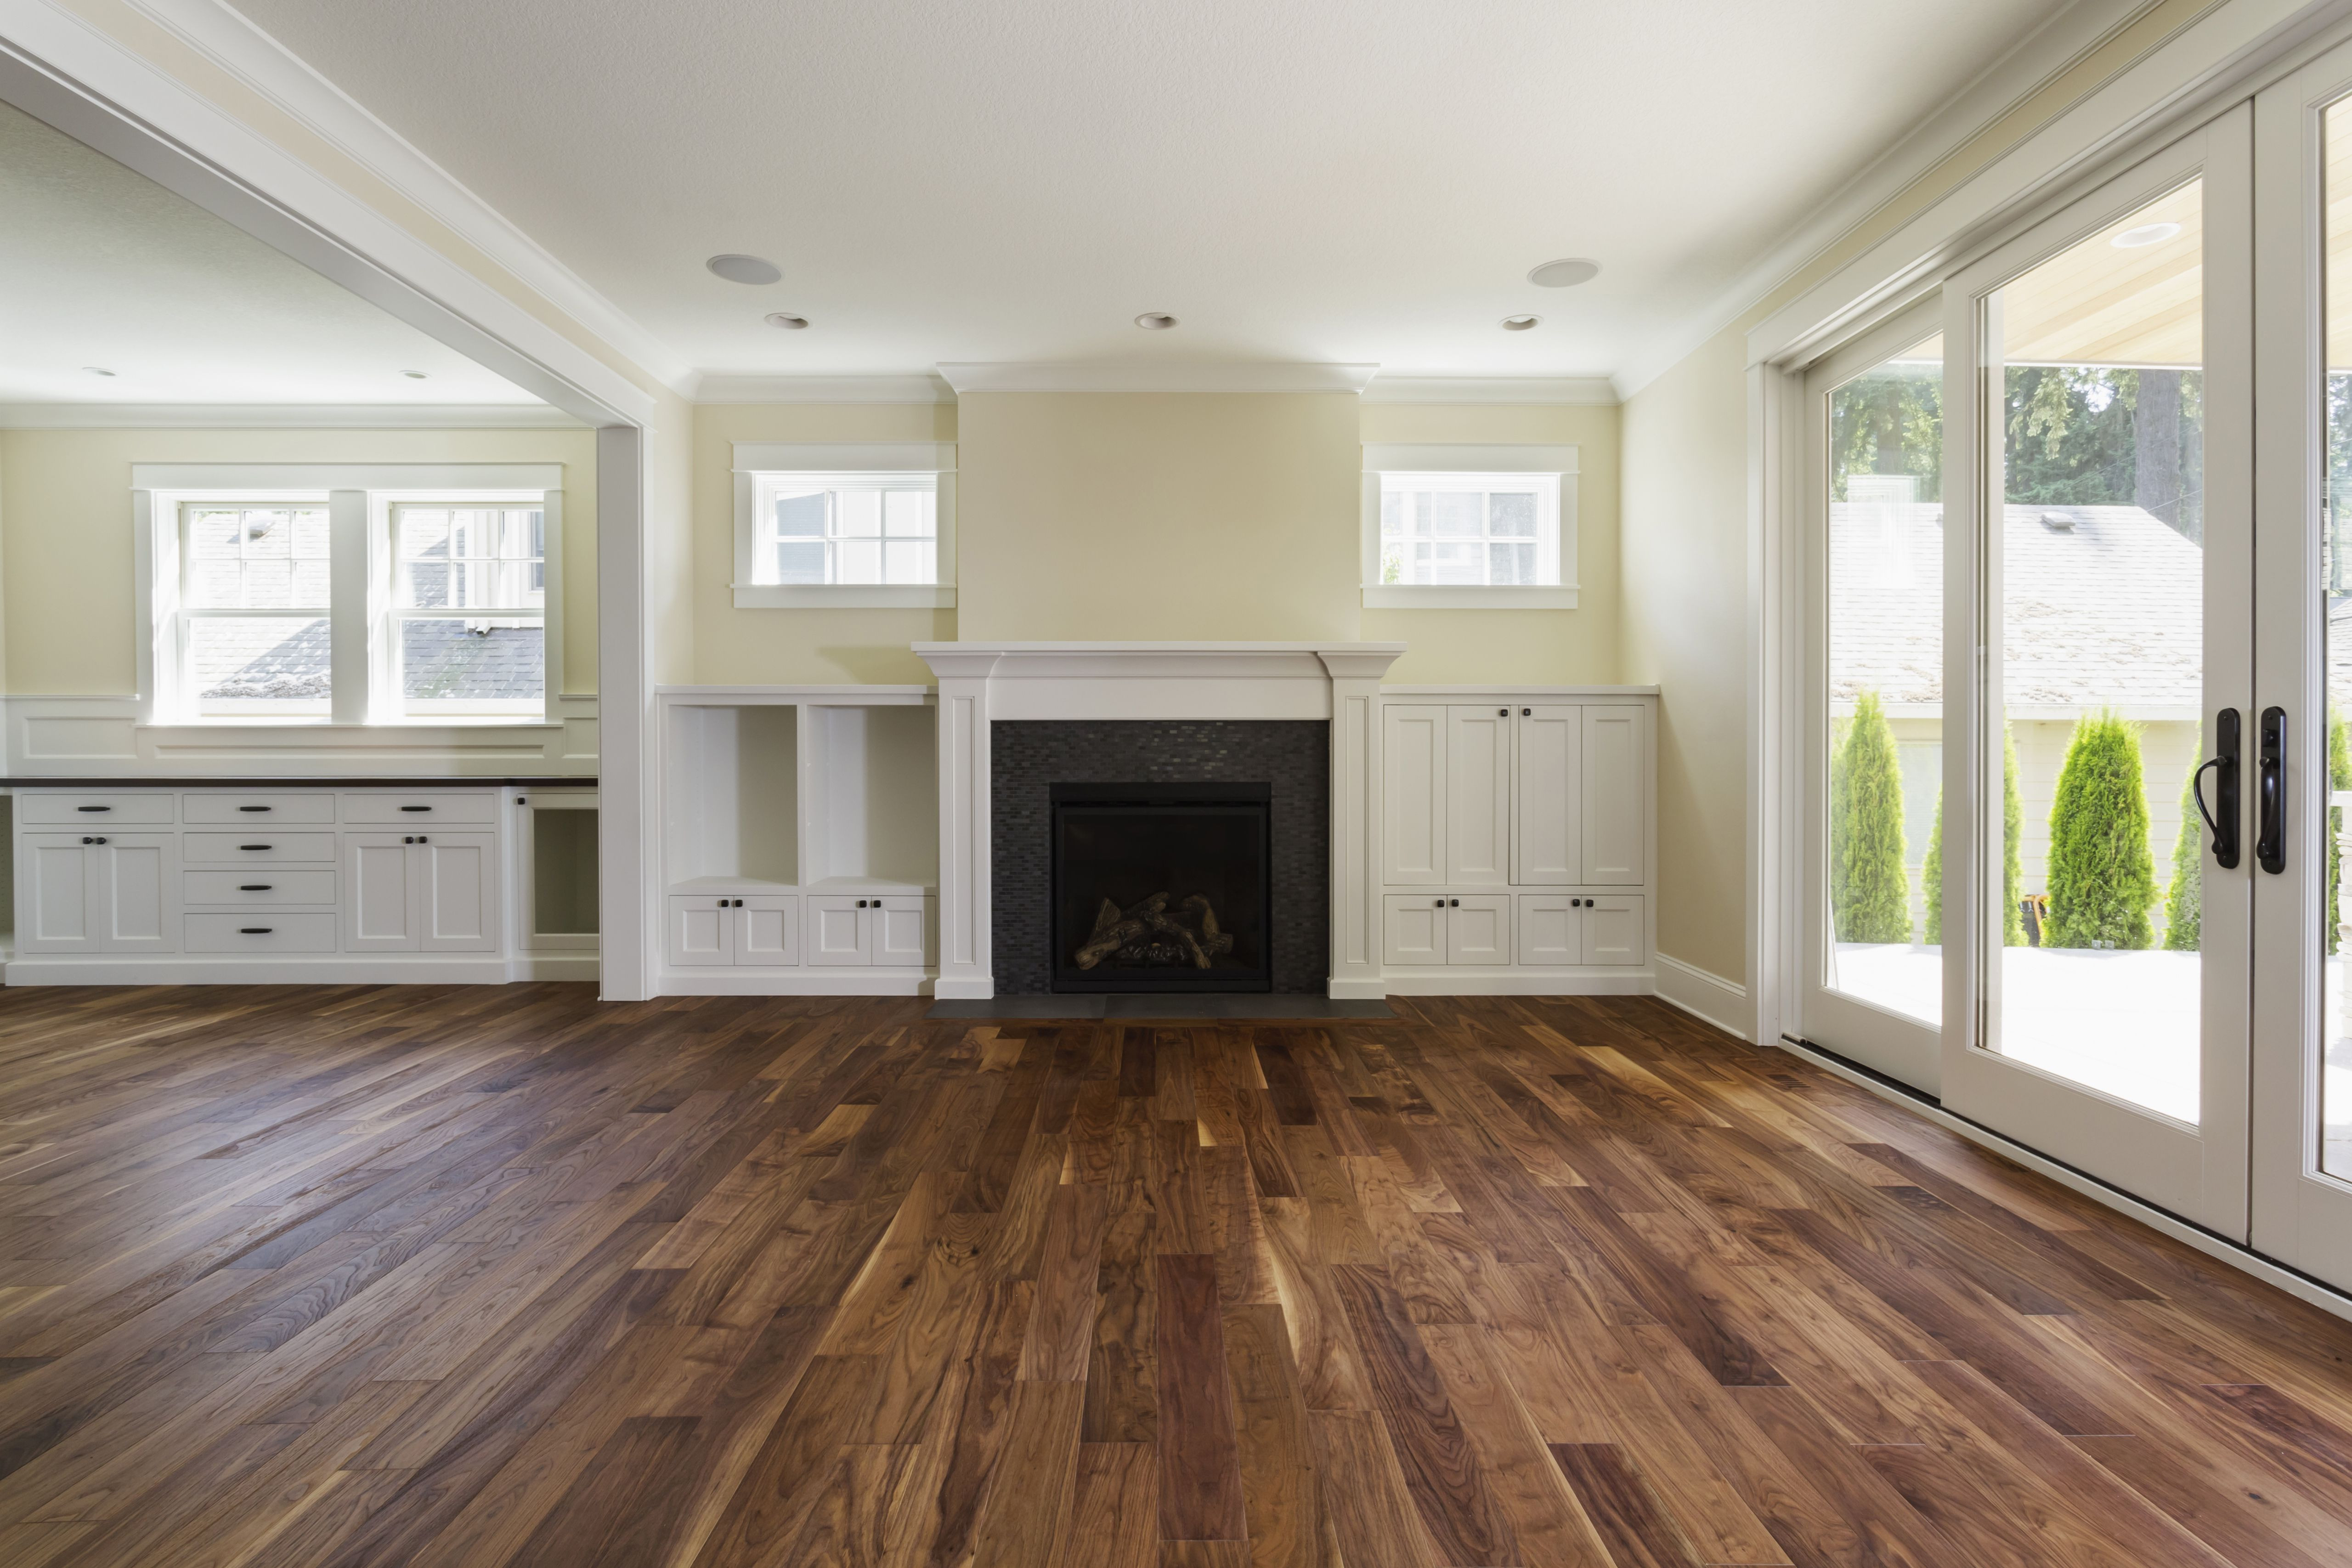 How to Sand and Refinish Hardwood Floors Yourself Of the Pros and Cons Of Prefinished Hardwood Flooring Inside Fireplace and Built In Shelves In Living Room 482143011 57bef8e33df78cc16e035397